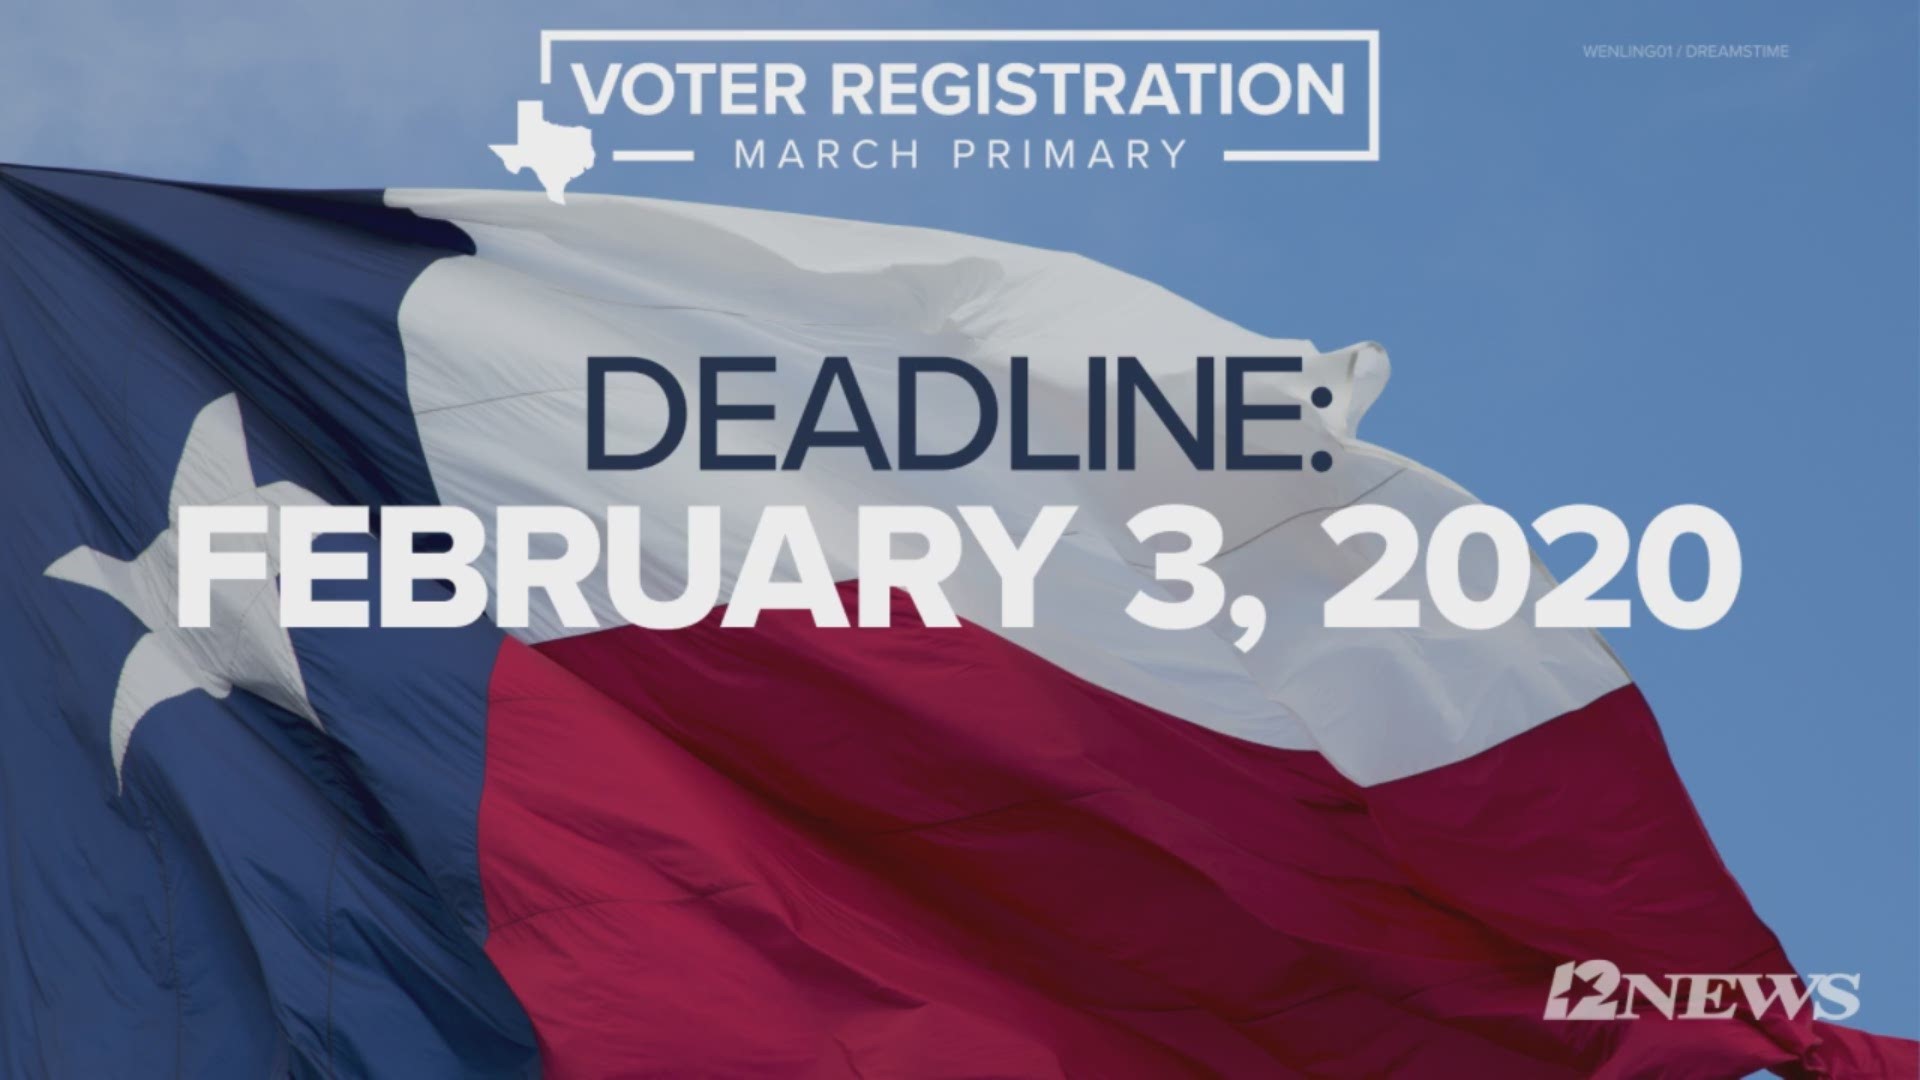 The deadline to register to vote in the March 3, 2020, primary is February 3.